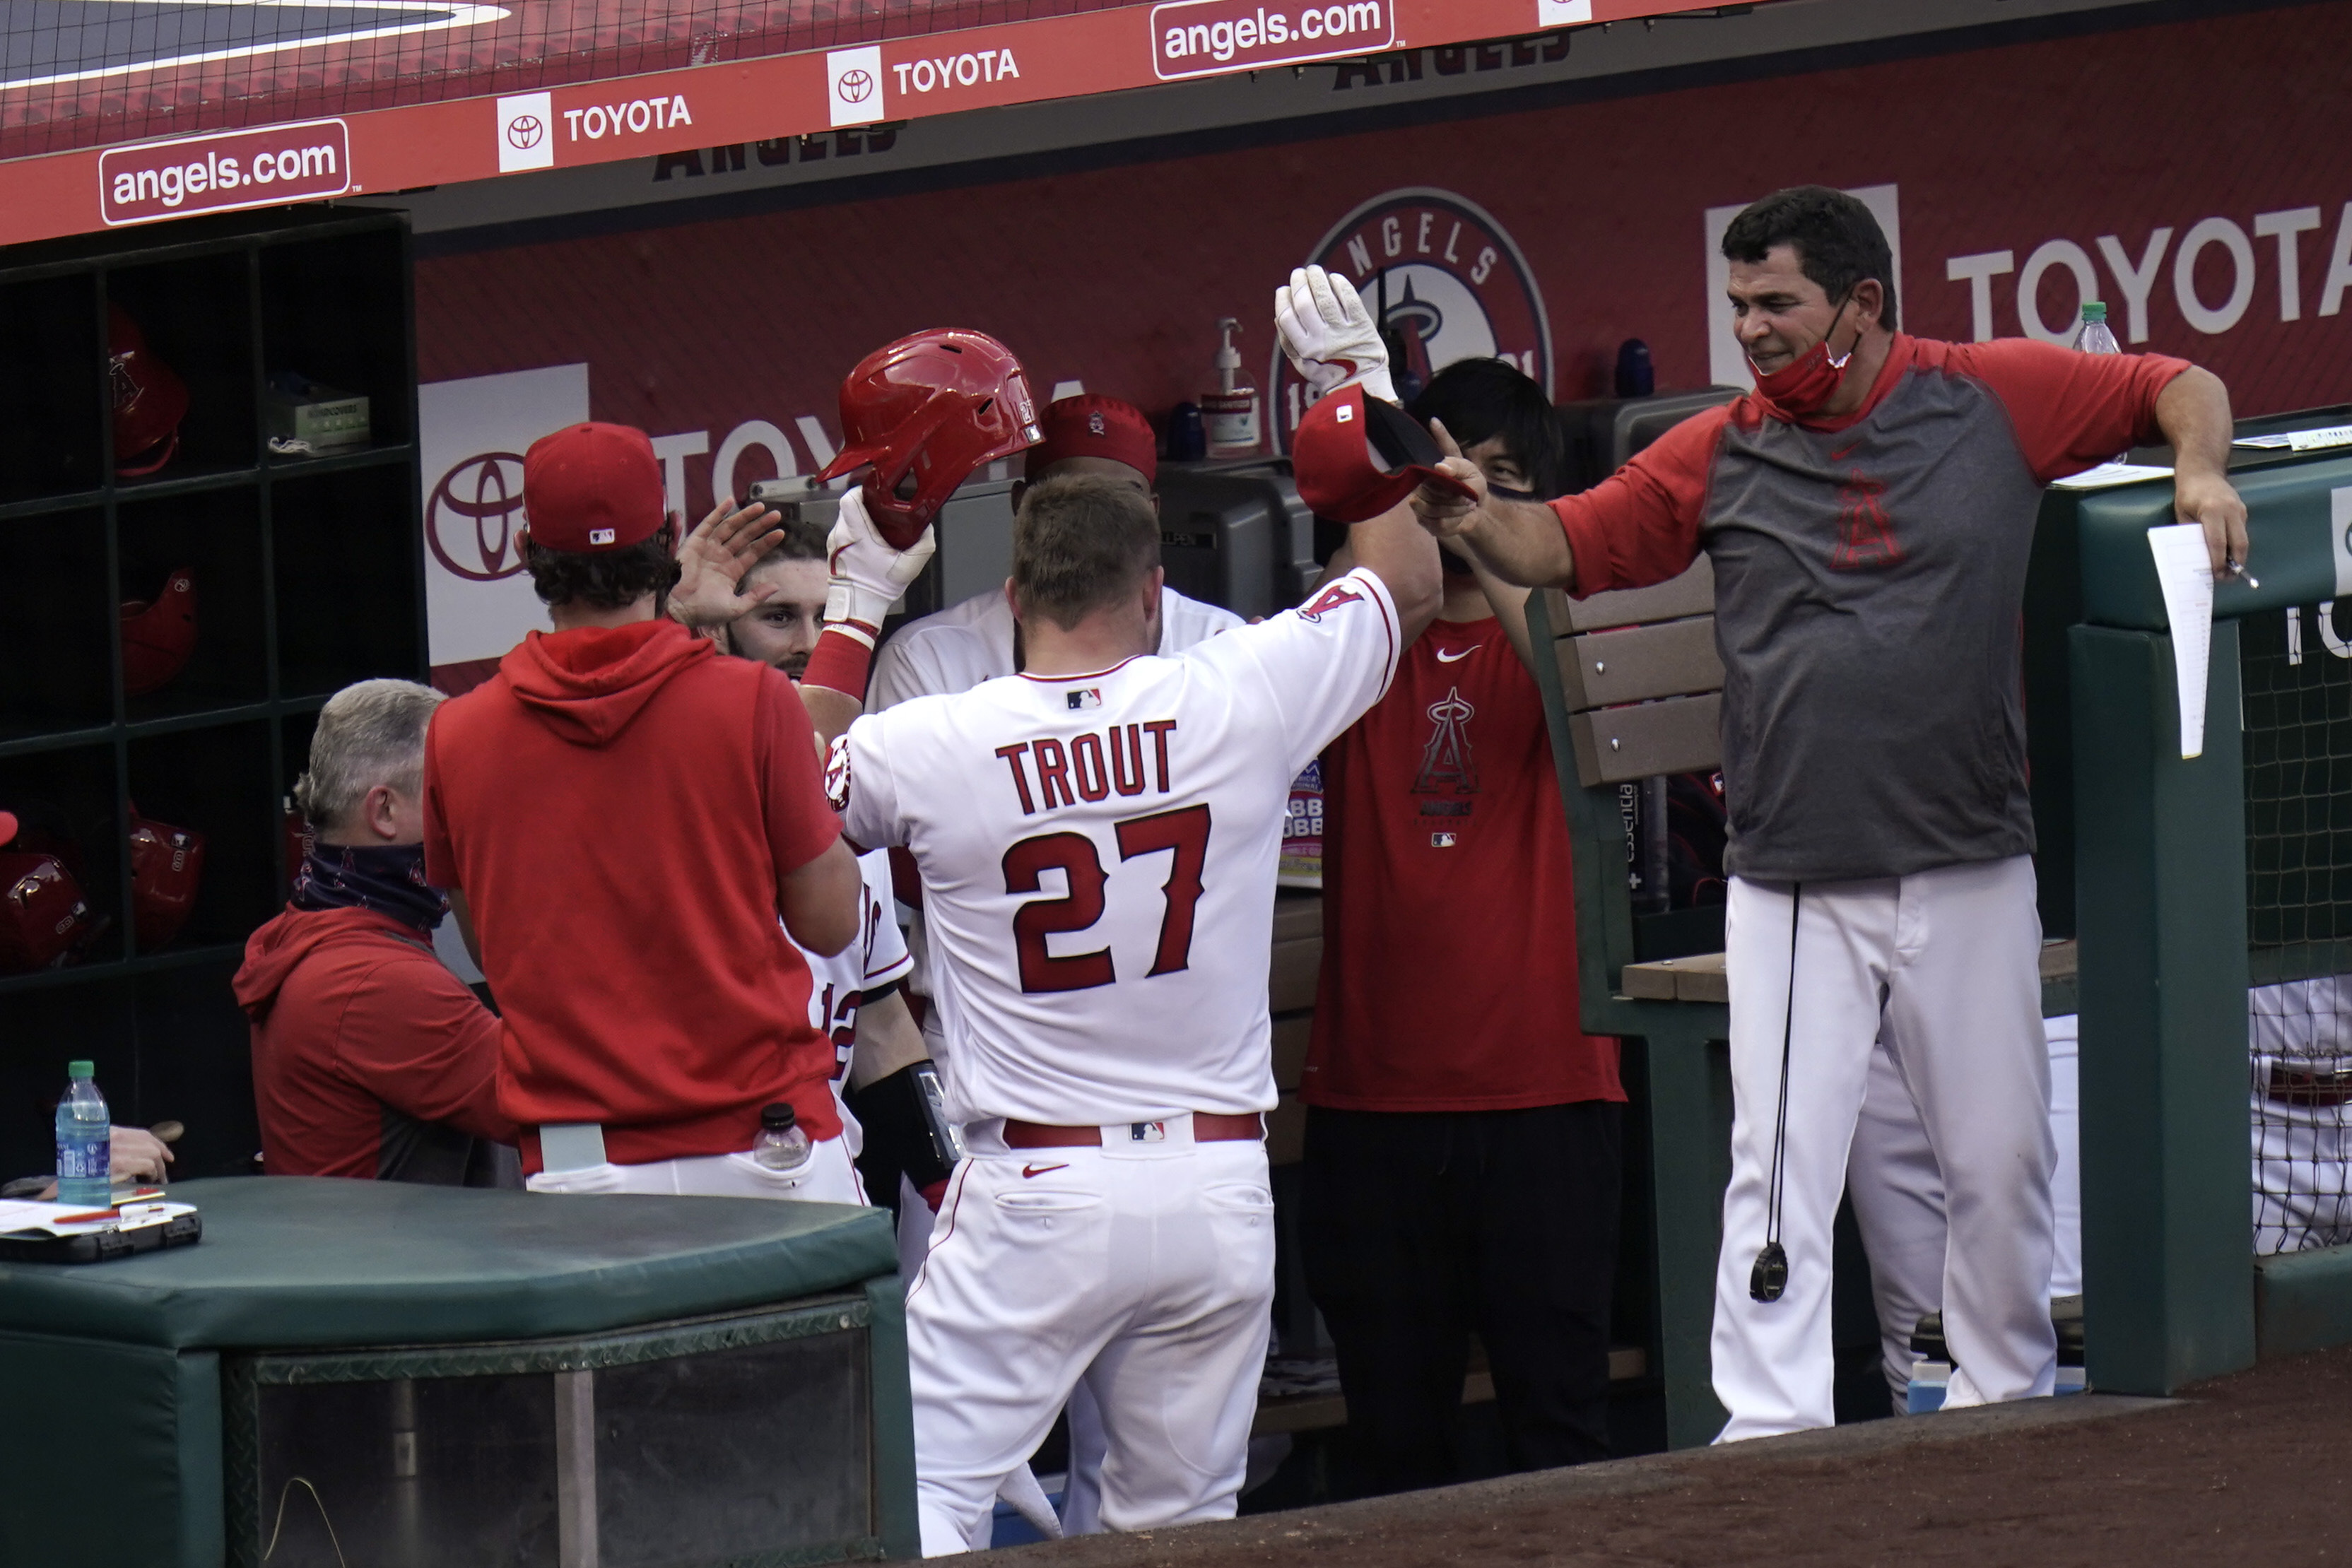 Trout hits 300th career home run, sets Angels career mark - NBC Sports